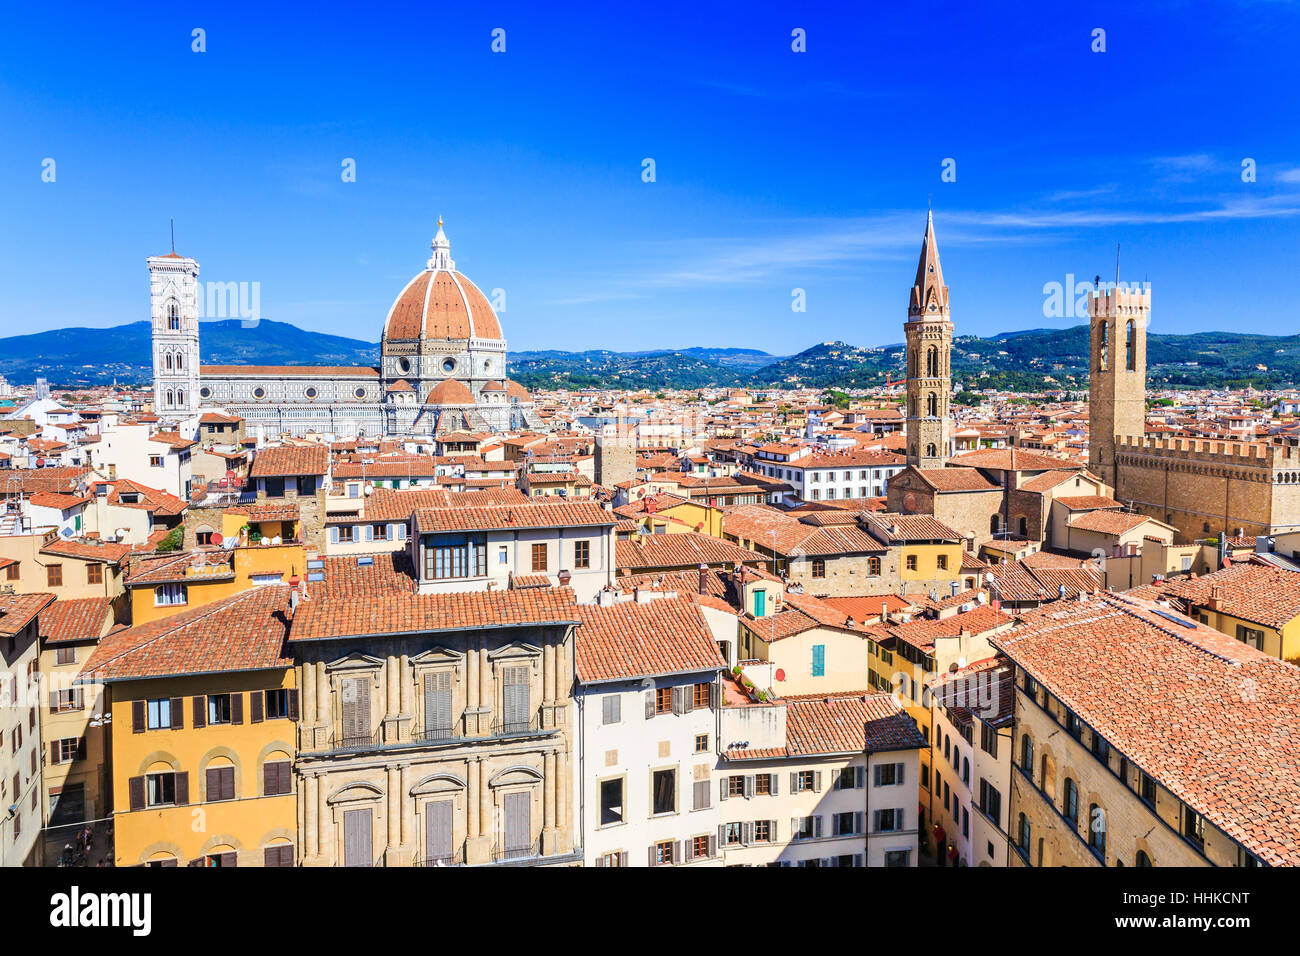 Florence, Italy. Palazzo Bargello Tower, Badia Fiorentina Belltower and the Cathedral with the Brunelleschi Dome. Stock Photo